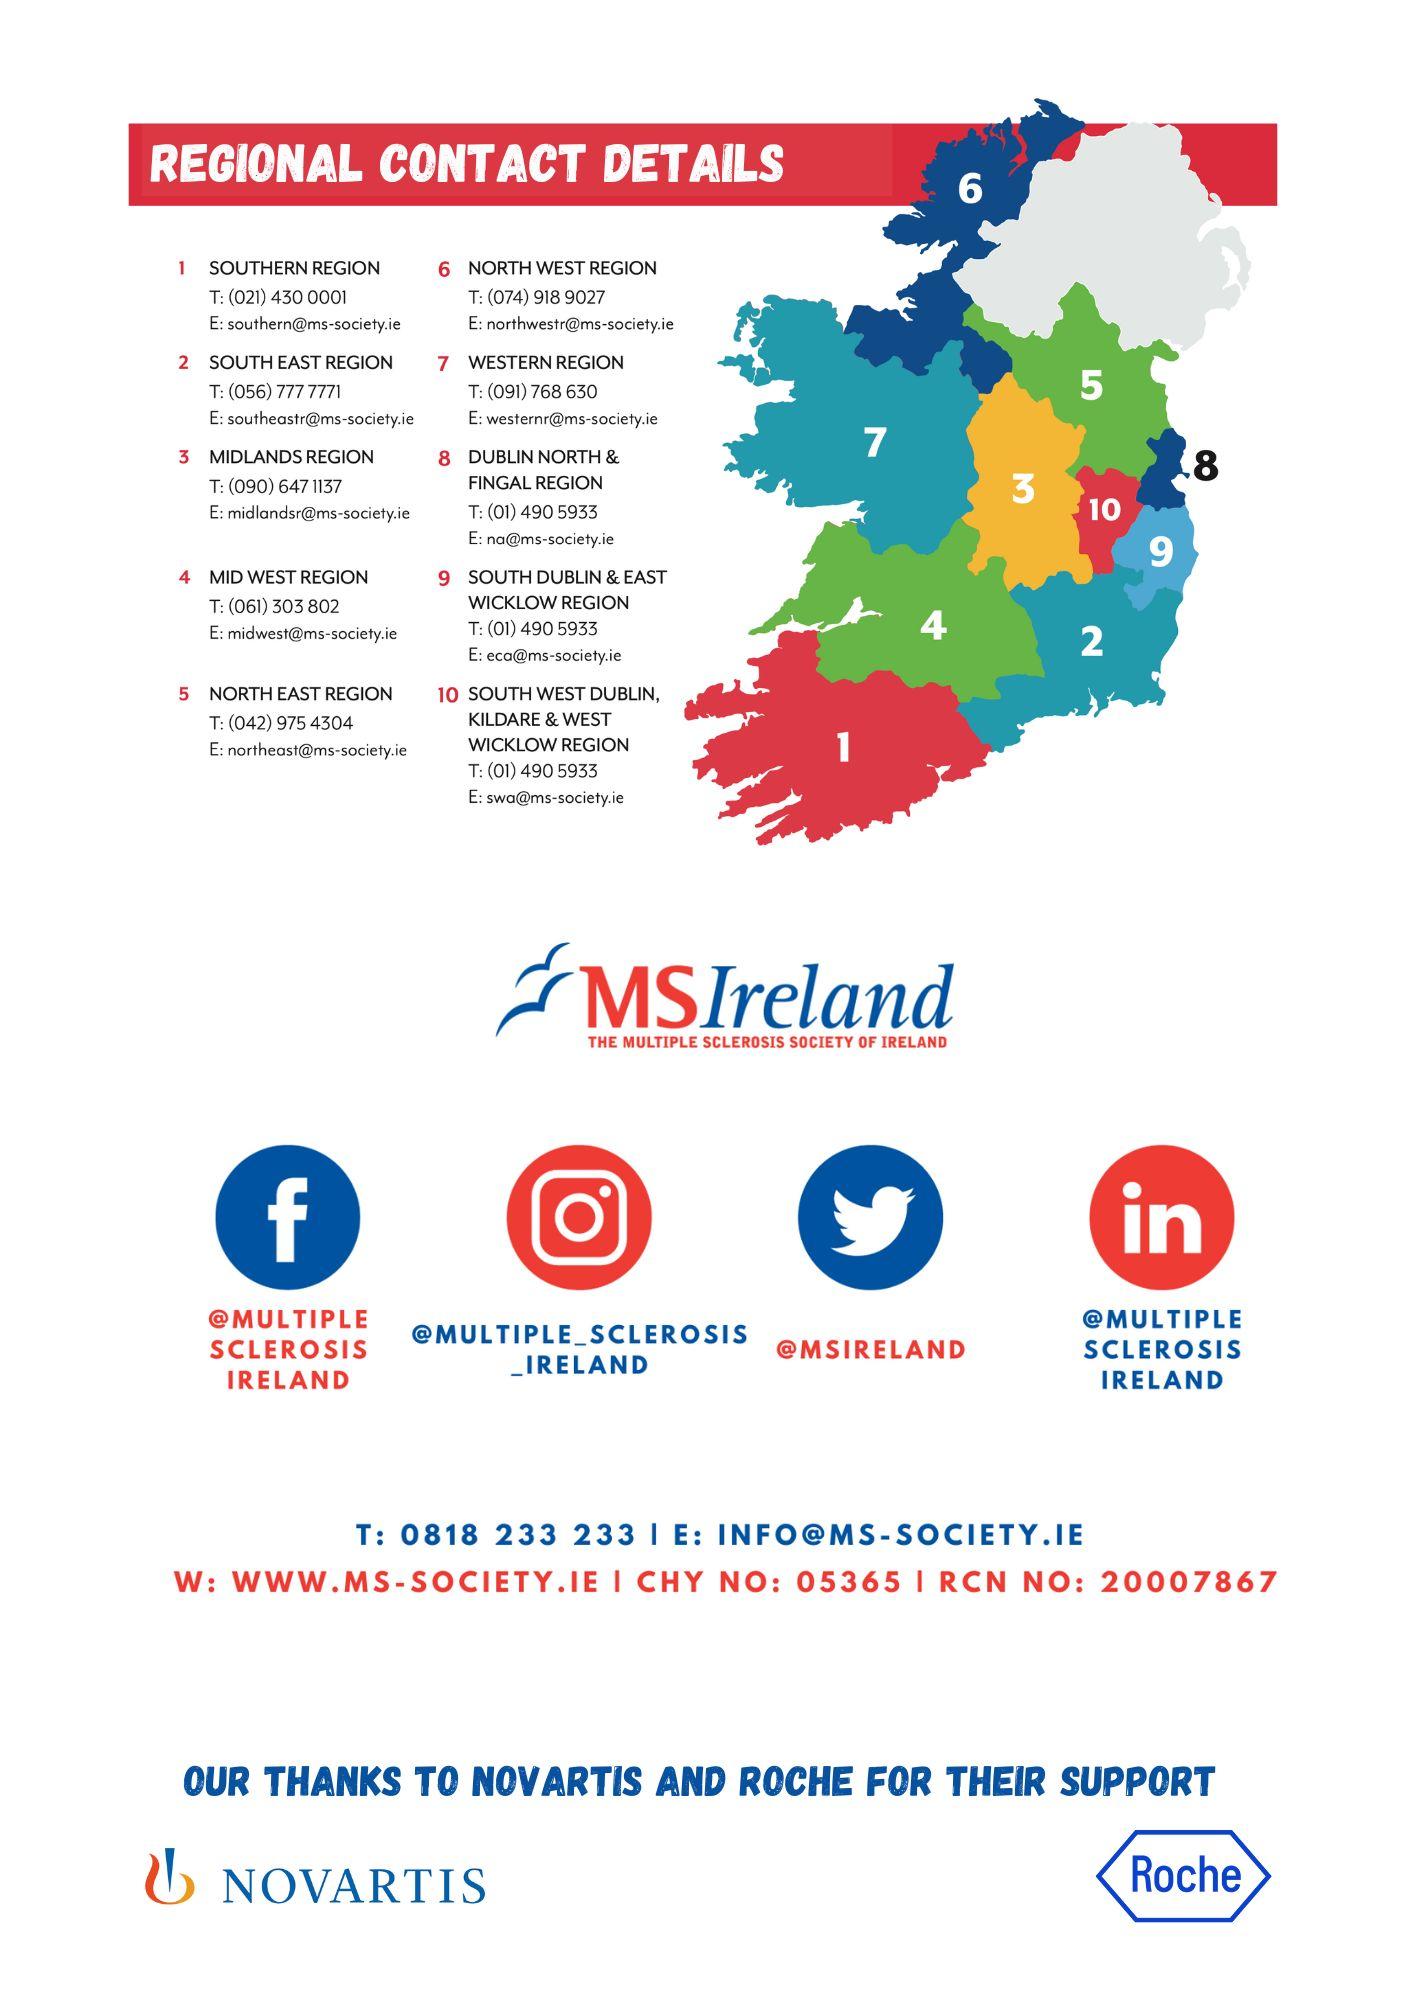 map of ms Ireland regional services and phone numbers on a white background as well as MS Ireland social media links on a white background. Roche and Novartis logos.